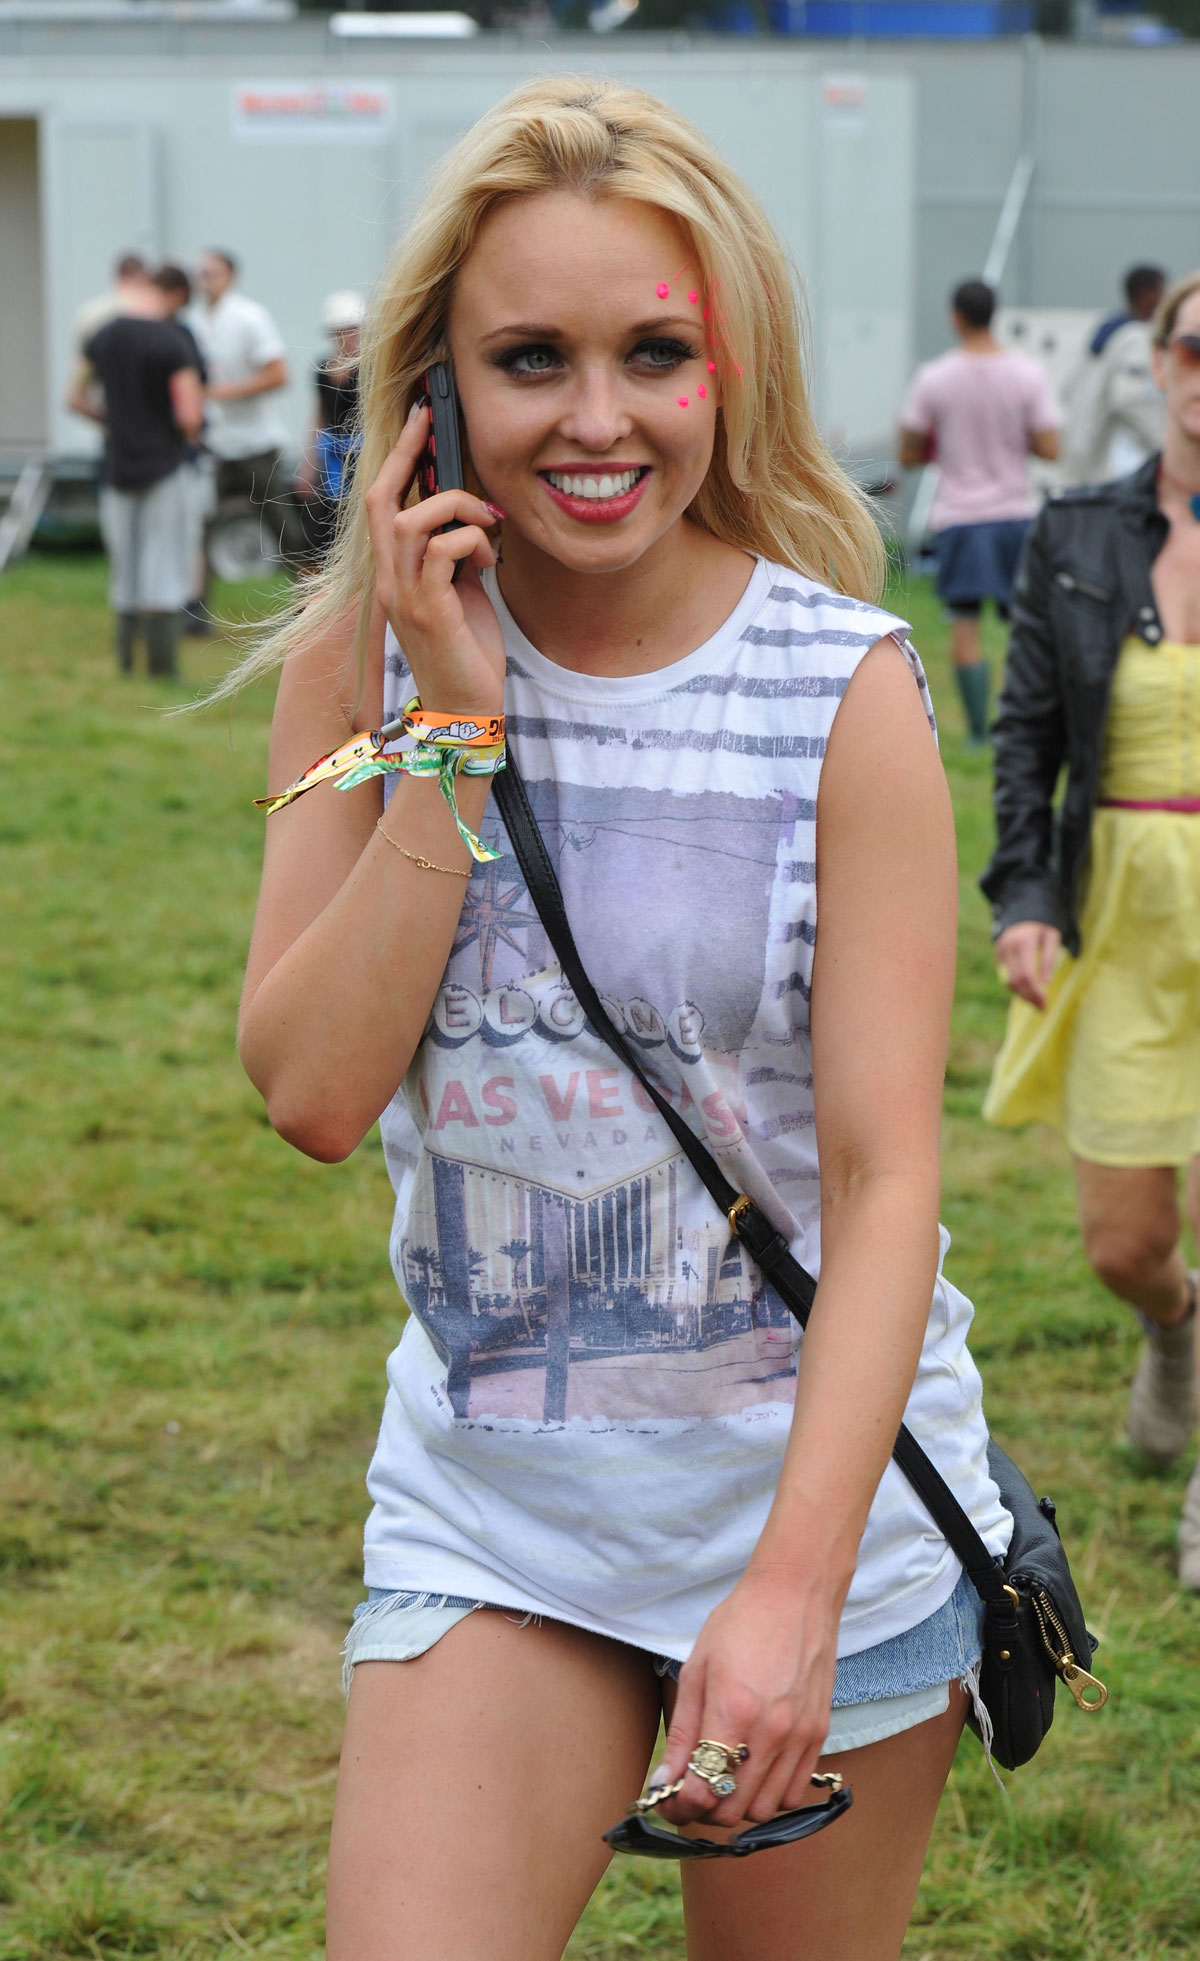 JORGIE PORTER and HOLLY WESTON at the V Festival in Staffordshire - HawtCelebs1200 x 1961